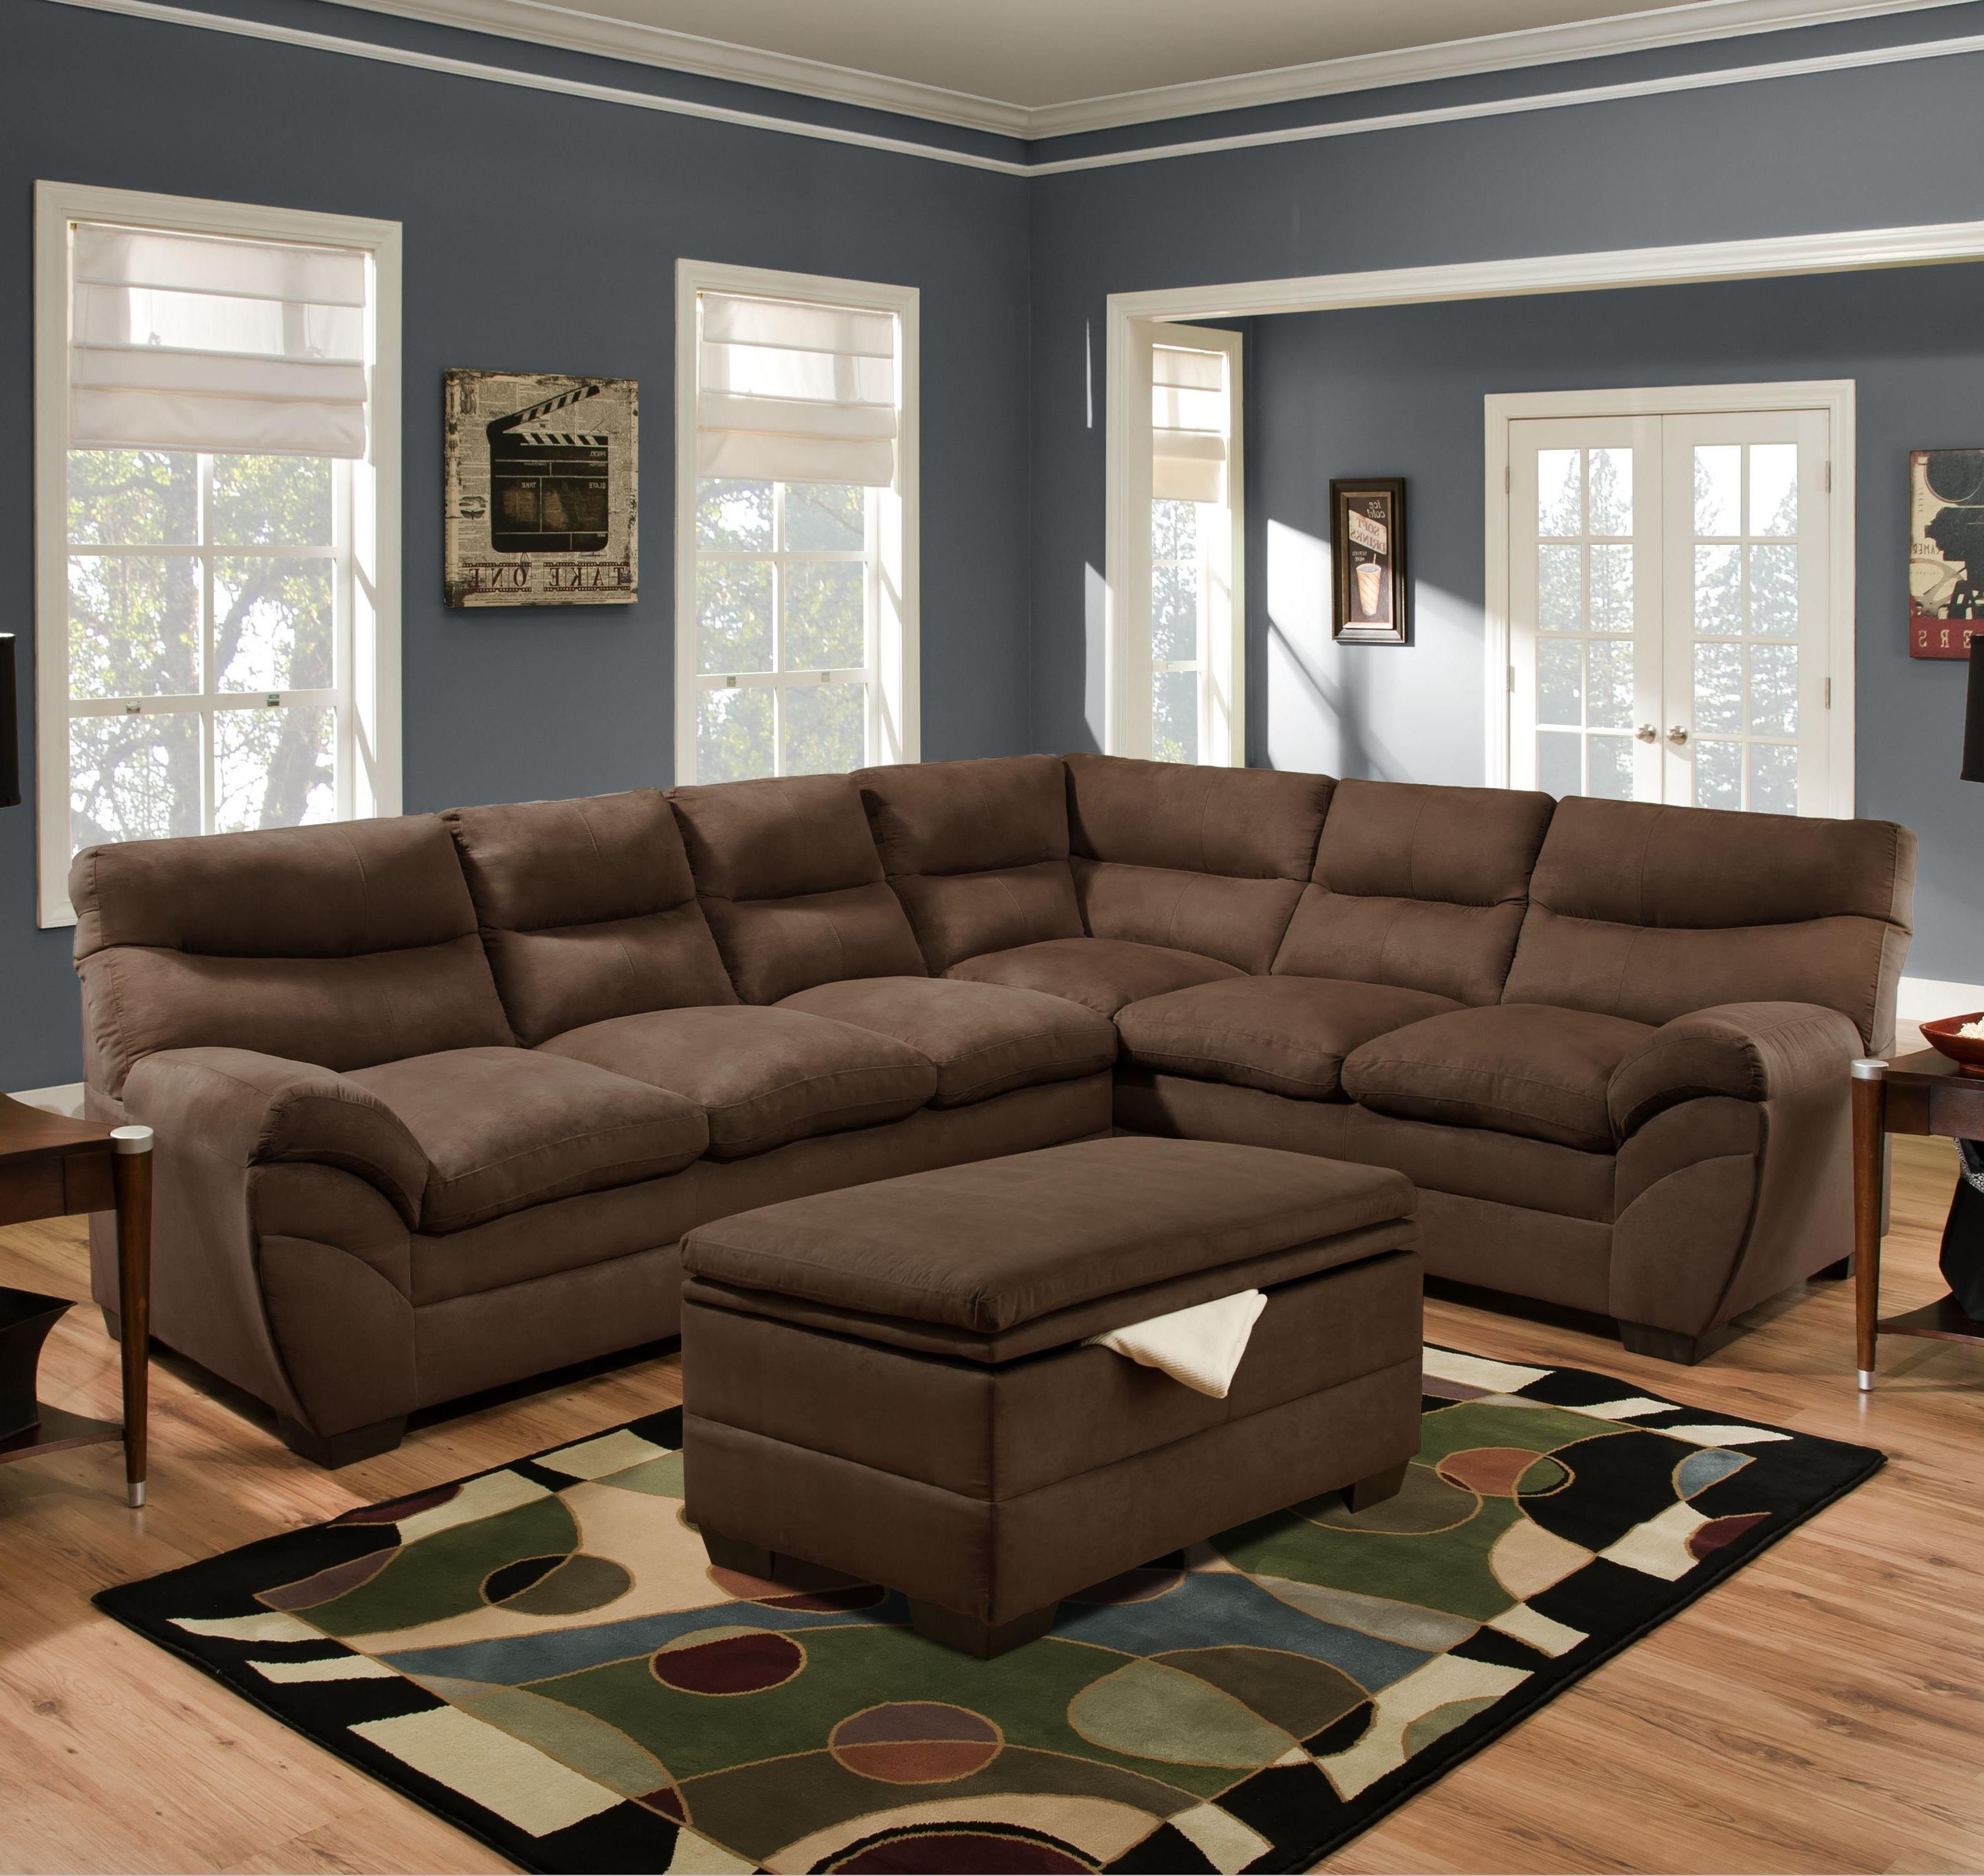 Featured Photo of 15 Best Simmons Sectional Sofas